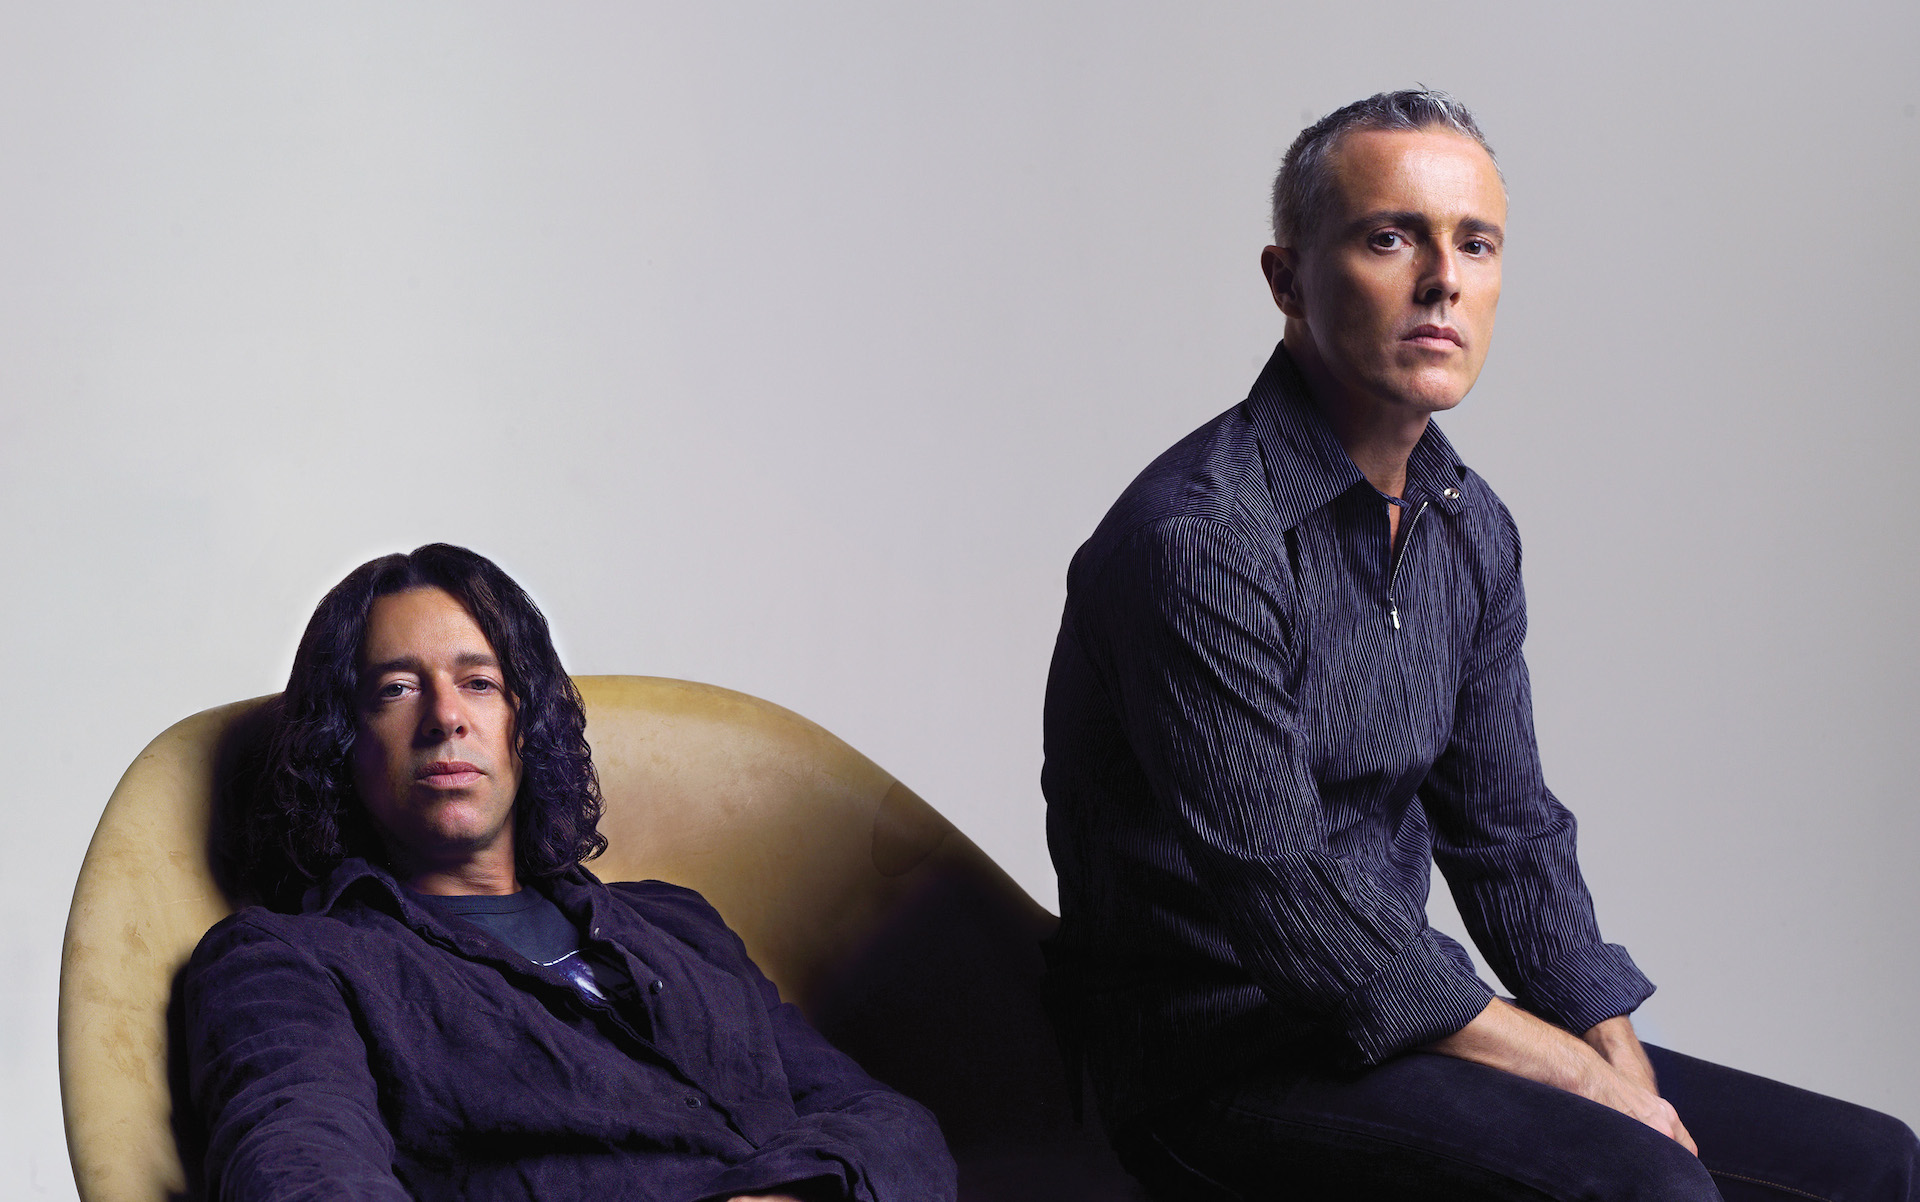 Live Review: A total love fest as Tears for Fears return to